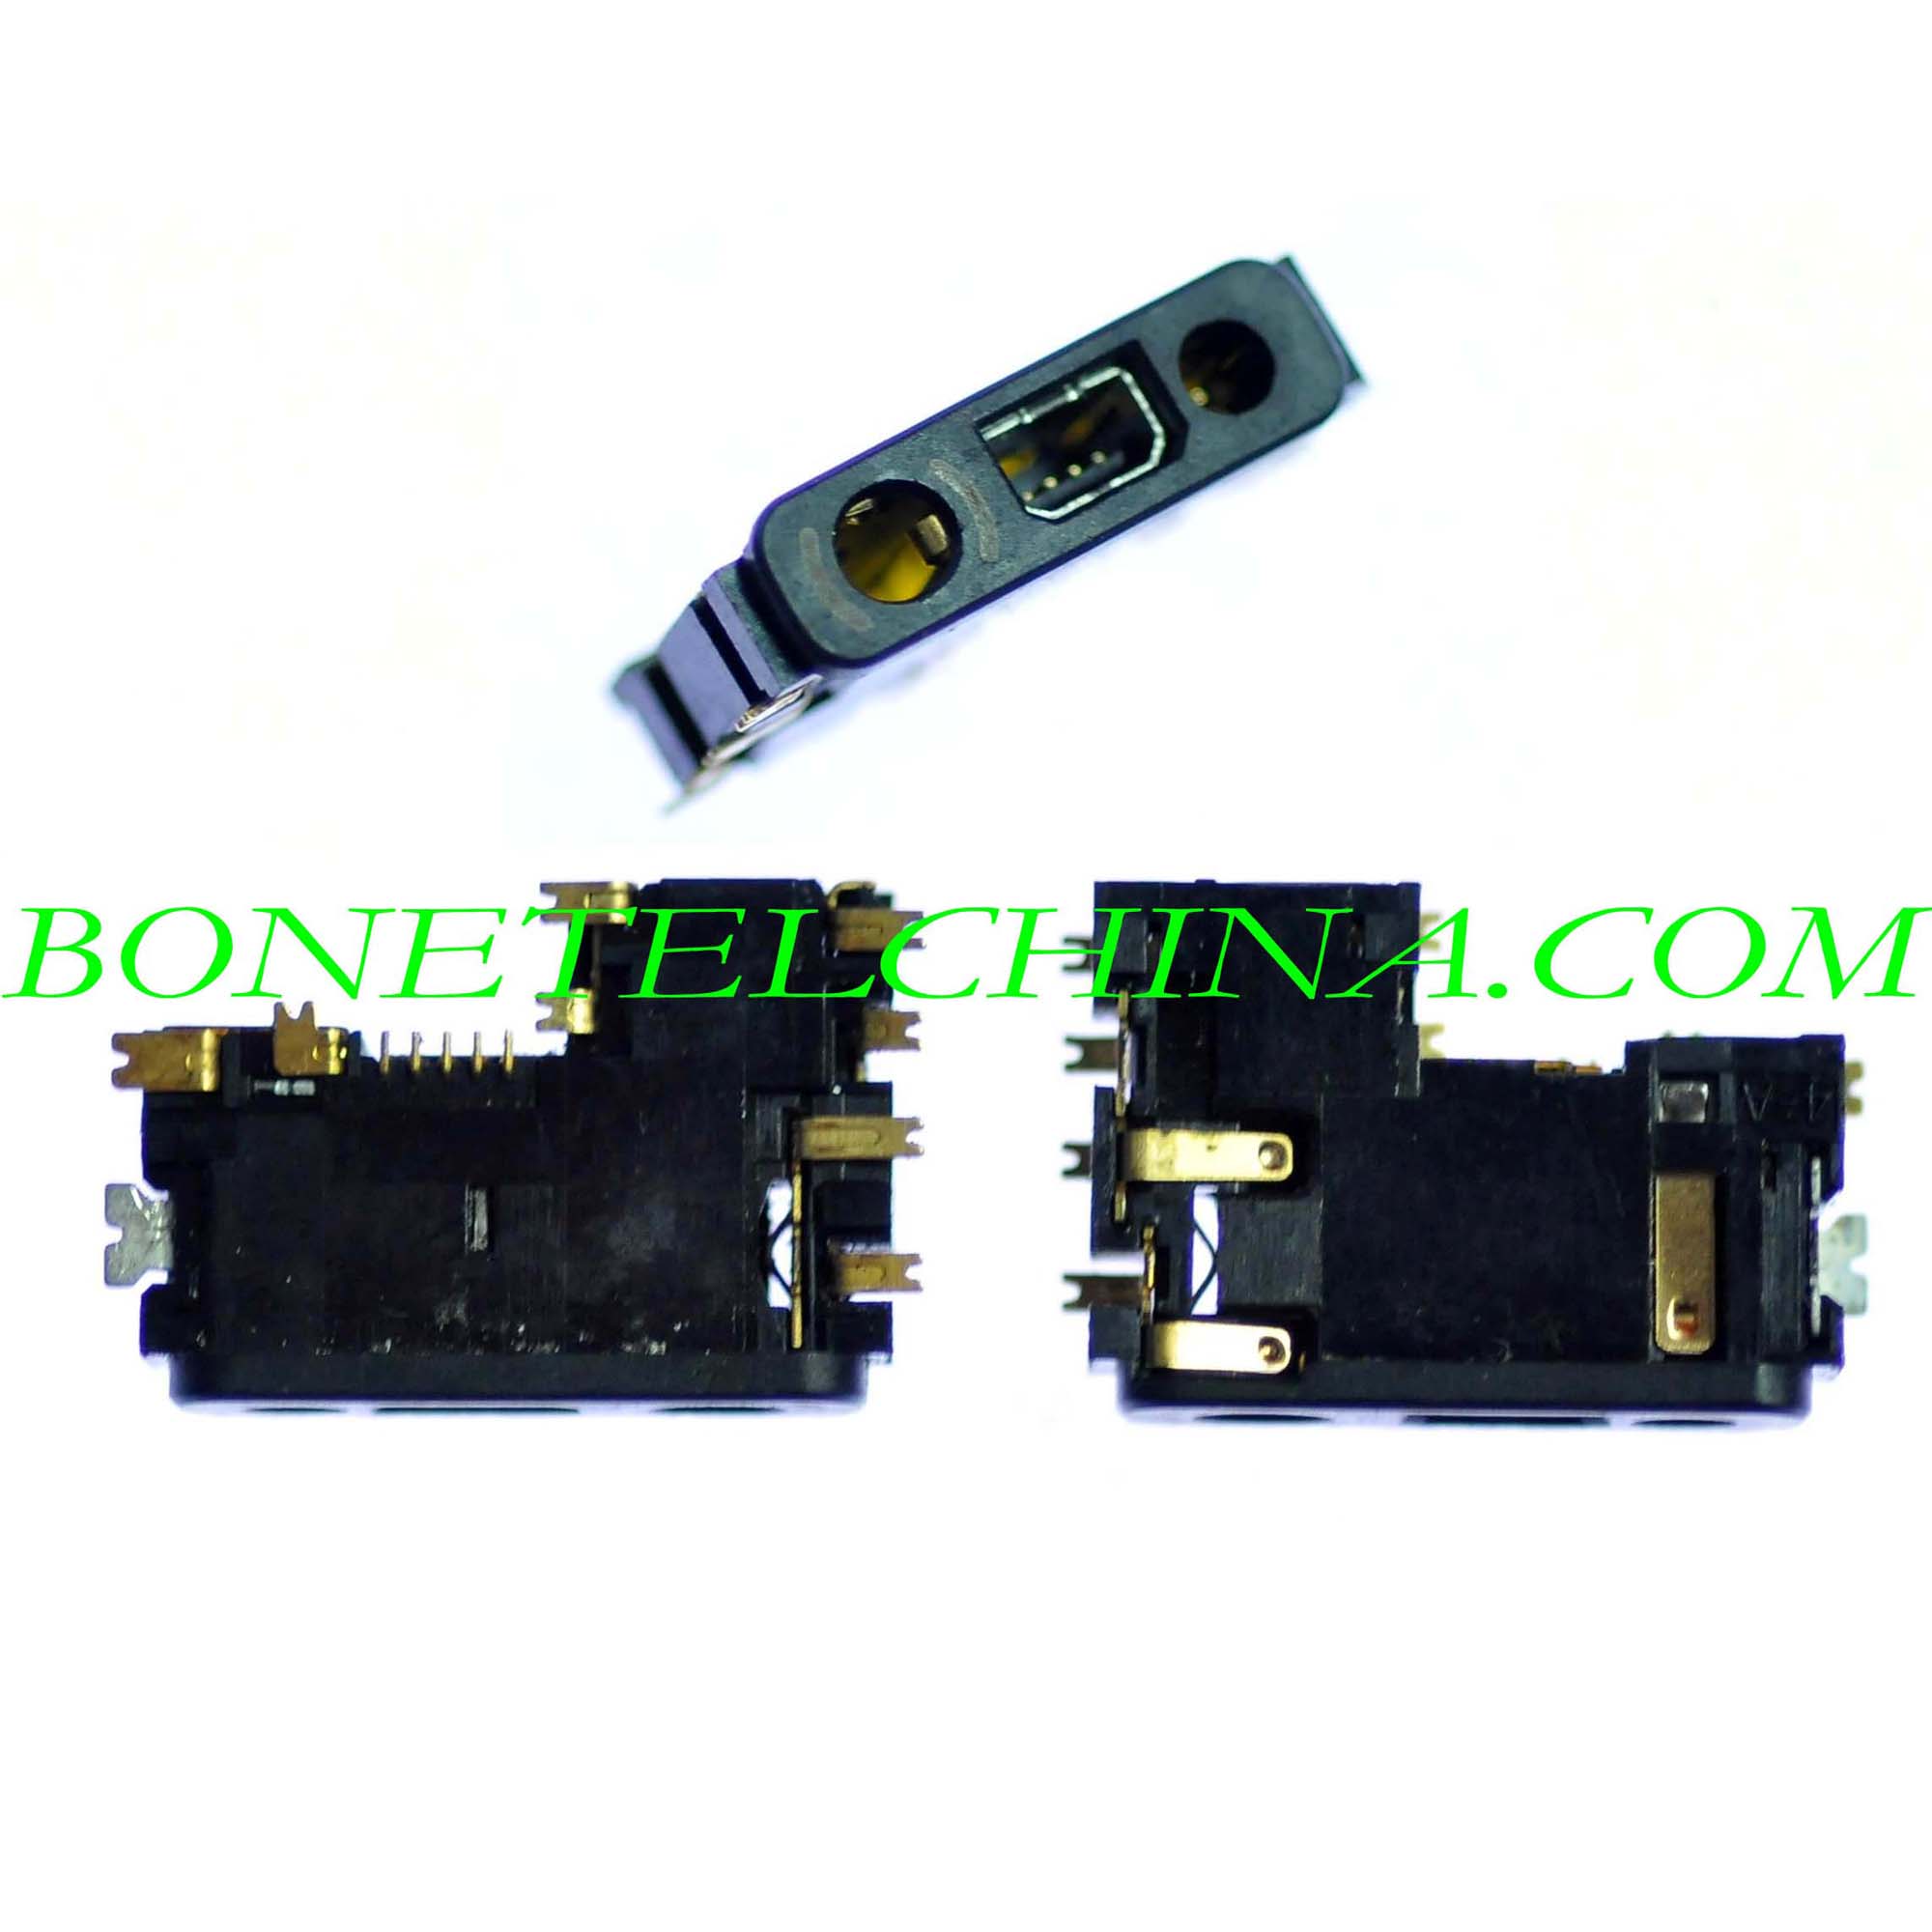 Charger connector for Nokia N5000, 1200